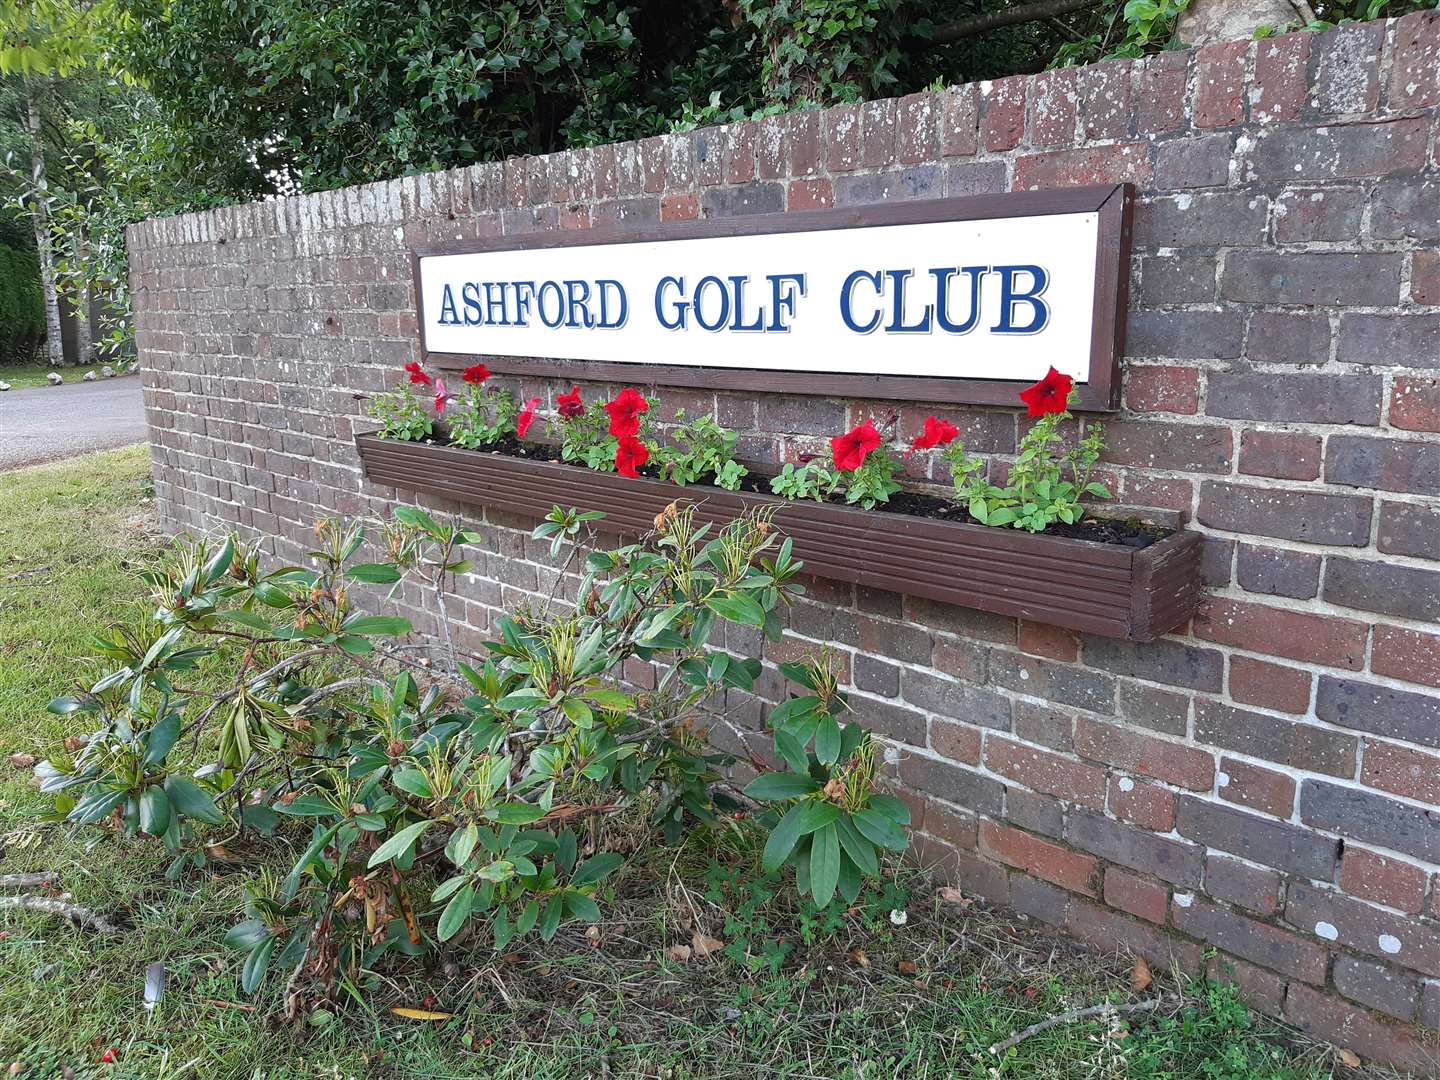 Golf clubs in Kent may be forced to close their courses again this week